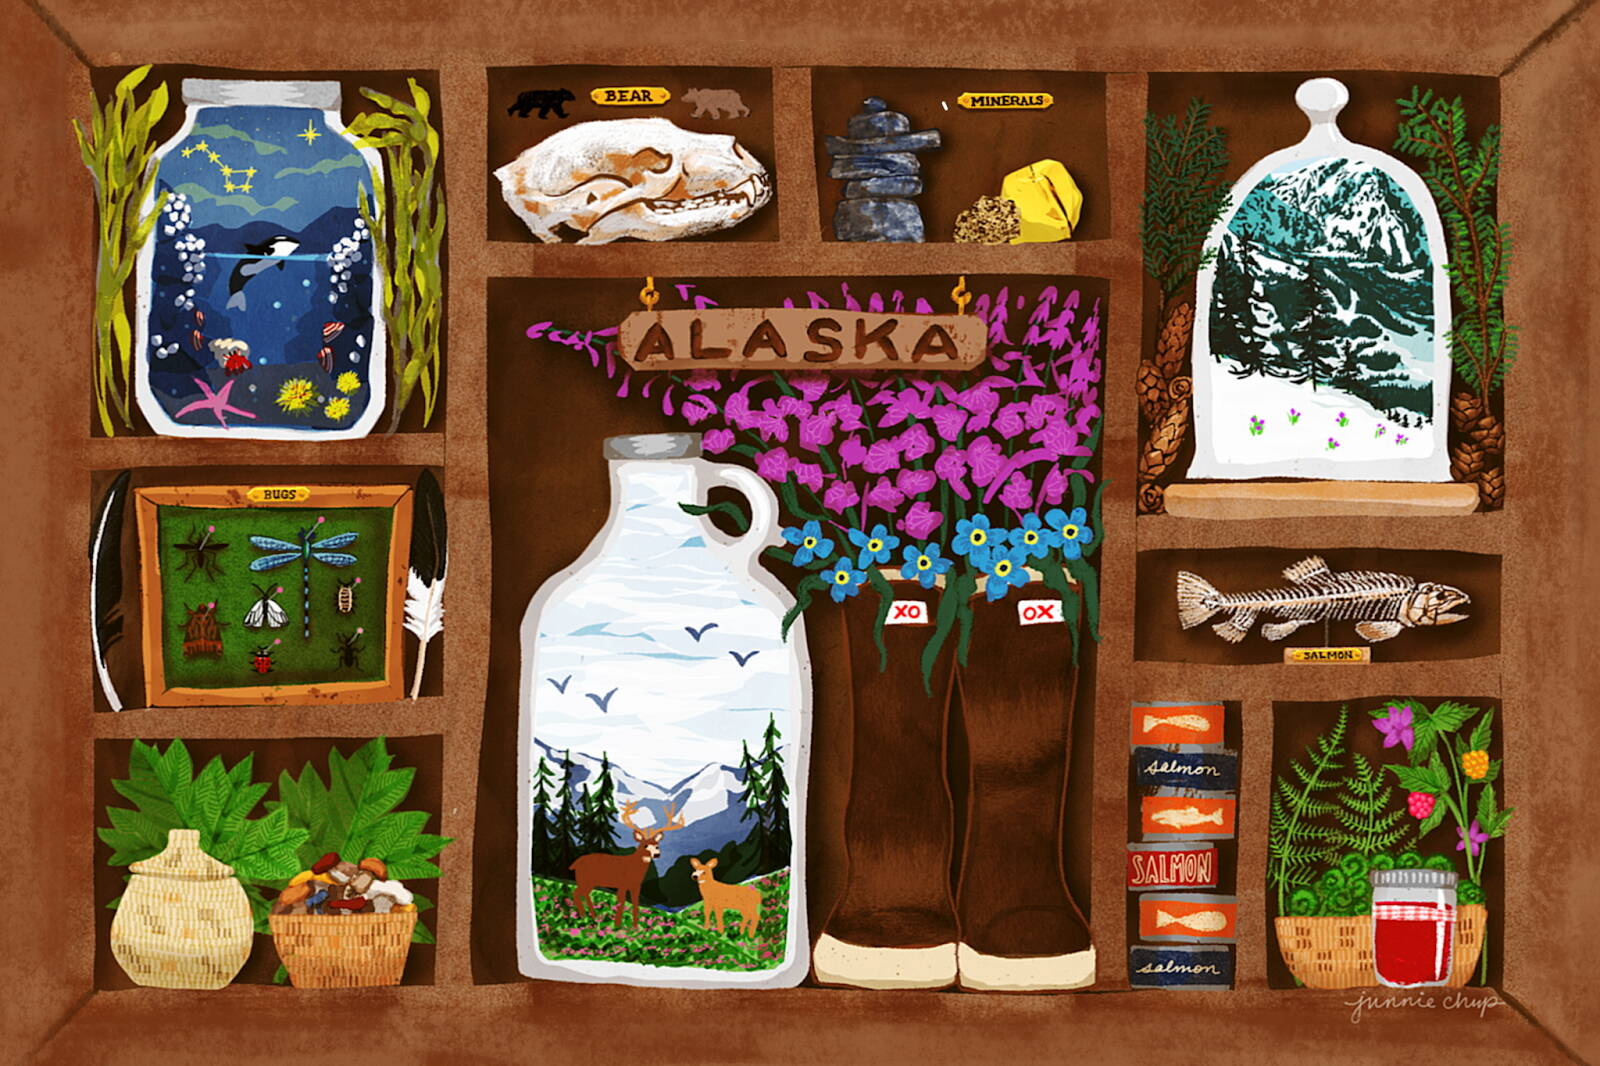 “Curiosities of Alaska” by Junnie Chup, which won first place in Kindred Post’s 2024 statewide postcard art contest. (Photo courtesy of Kindred Post)